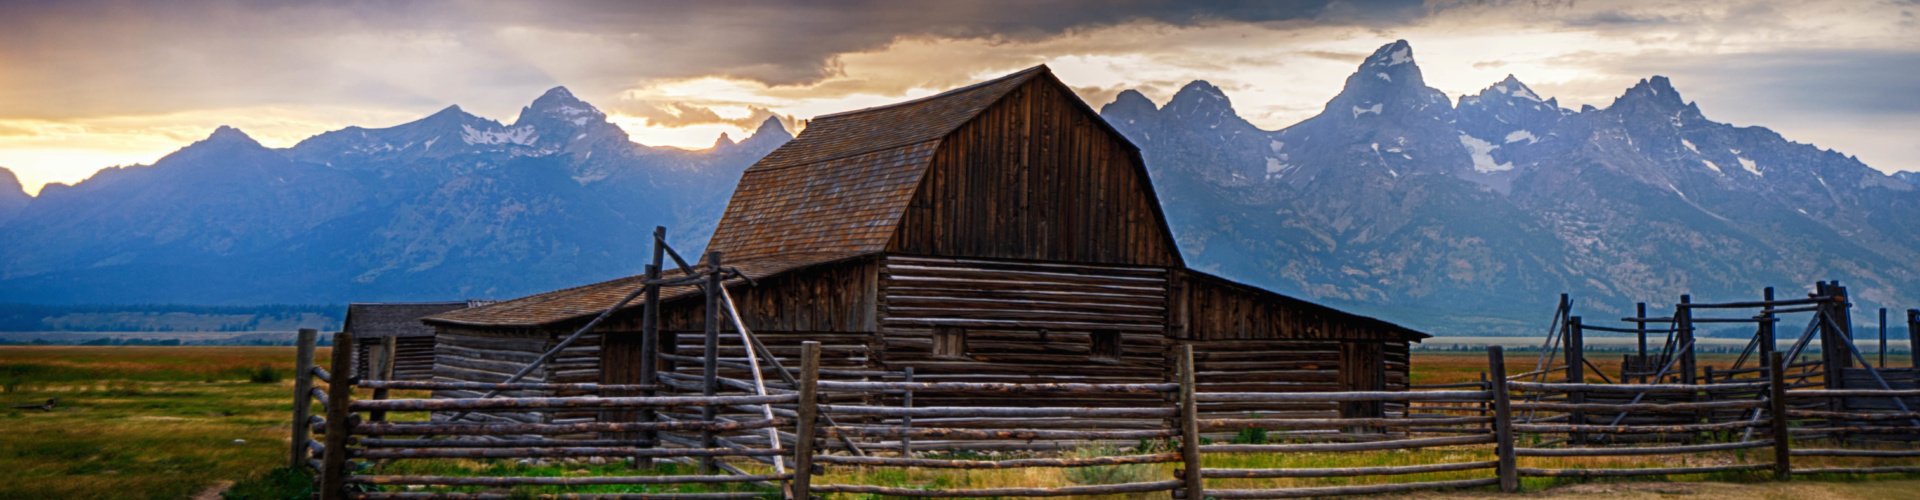 Focal Point: 6 Pictures from the Barns of Grand Teton National Park